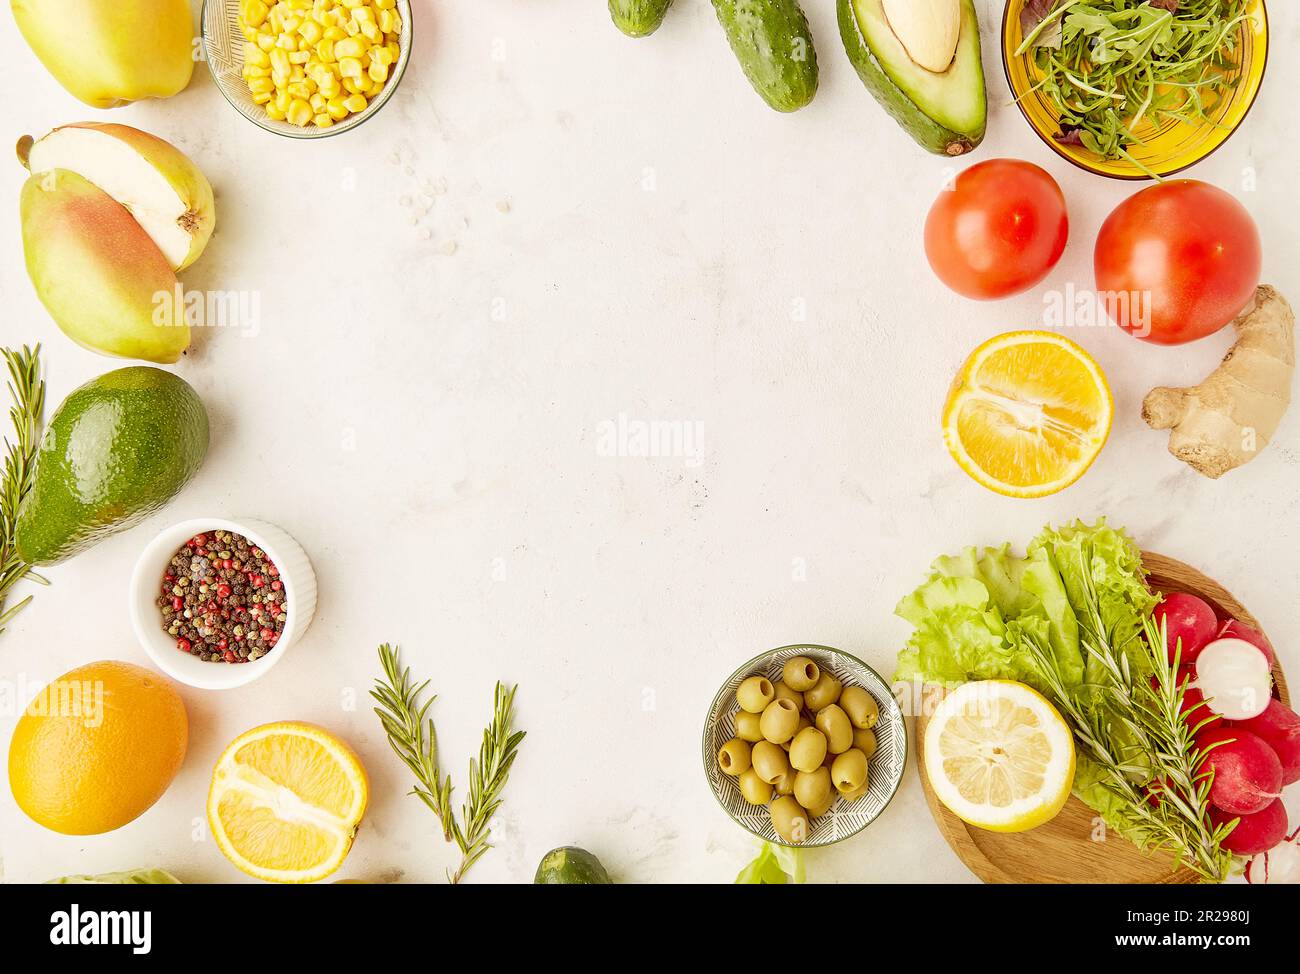 Low carb, FODMAP, Mediterranean, KETO, plant based diet food. Fruits, vegetables, greens, citrus, olives with copy space in the centre. Detox, healthy Stock Photo